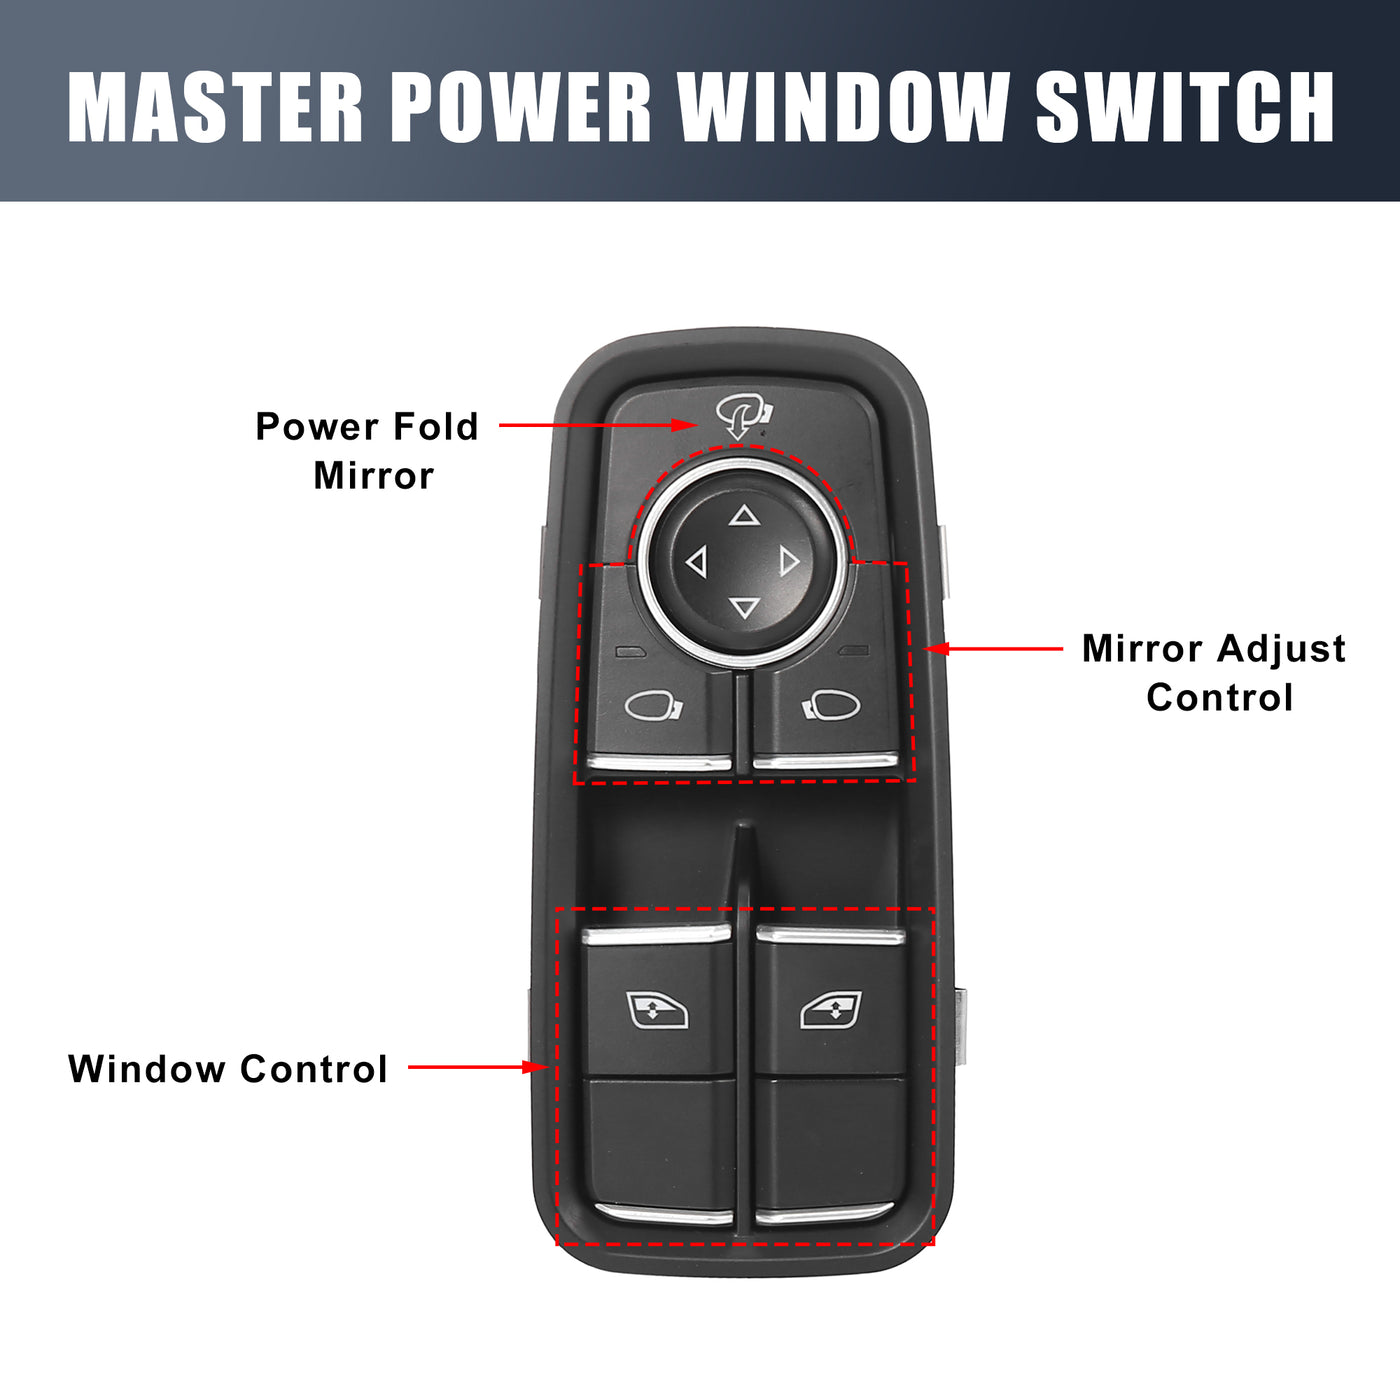 X AUTOHAUX Master Driver Side Power Window Switch 99161315502DML Replacement for Porsche Cayman 2014 2015 2016 for Boxster 2013 2014 2015 2016